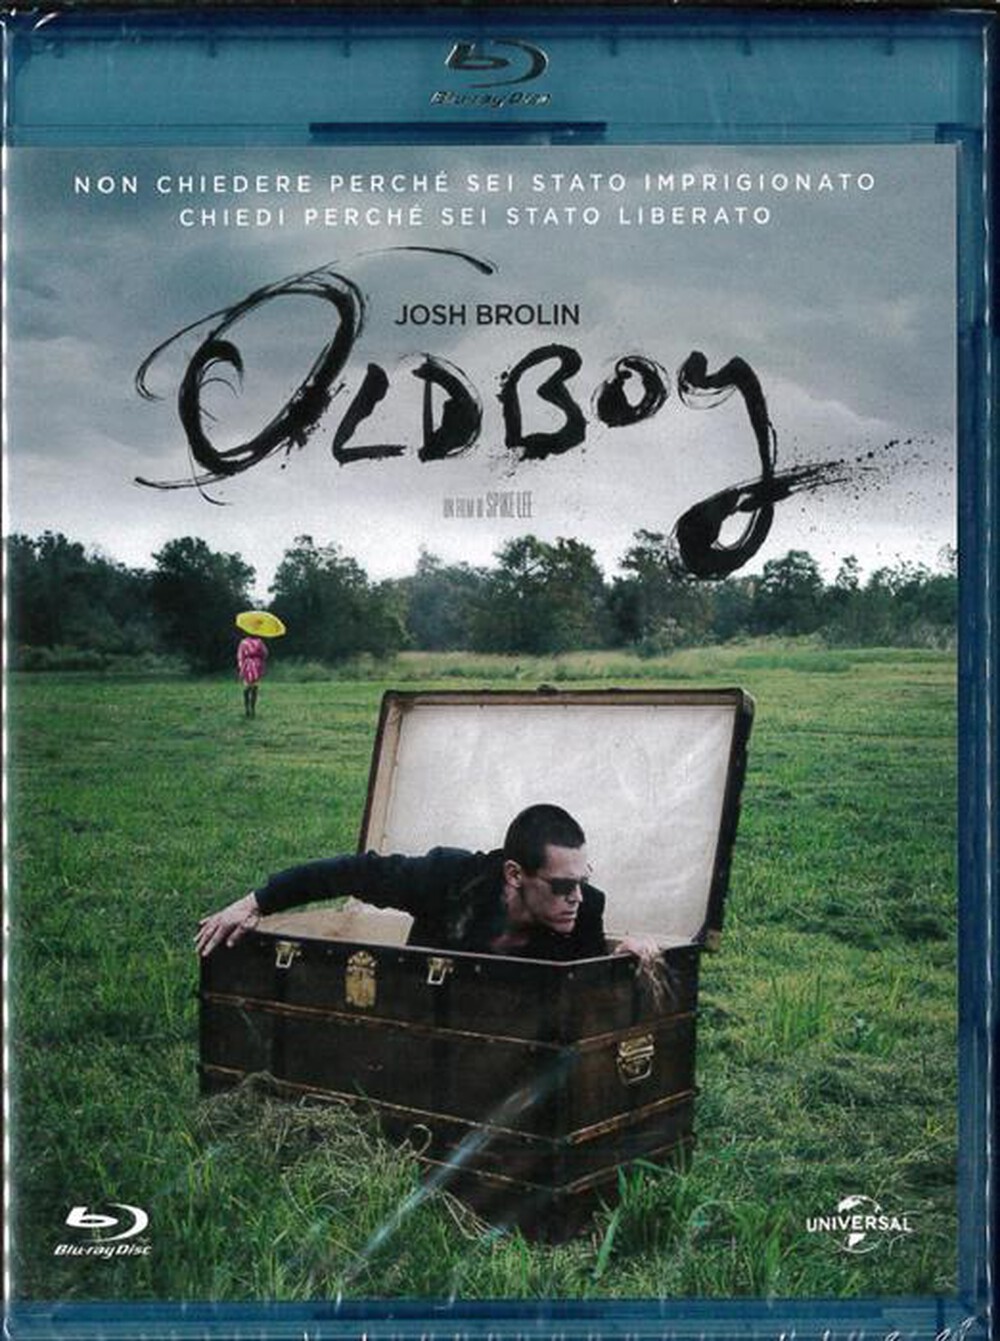 "UNIVERSAL PICTURES - Oldboy"